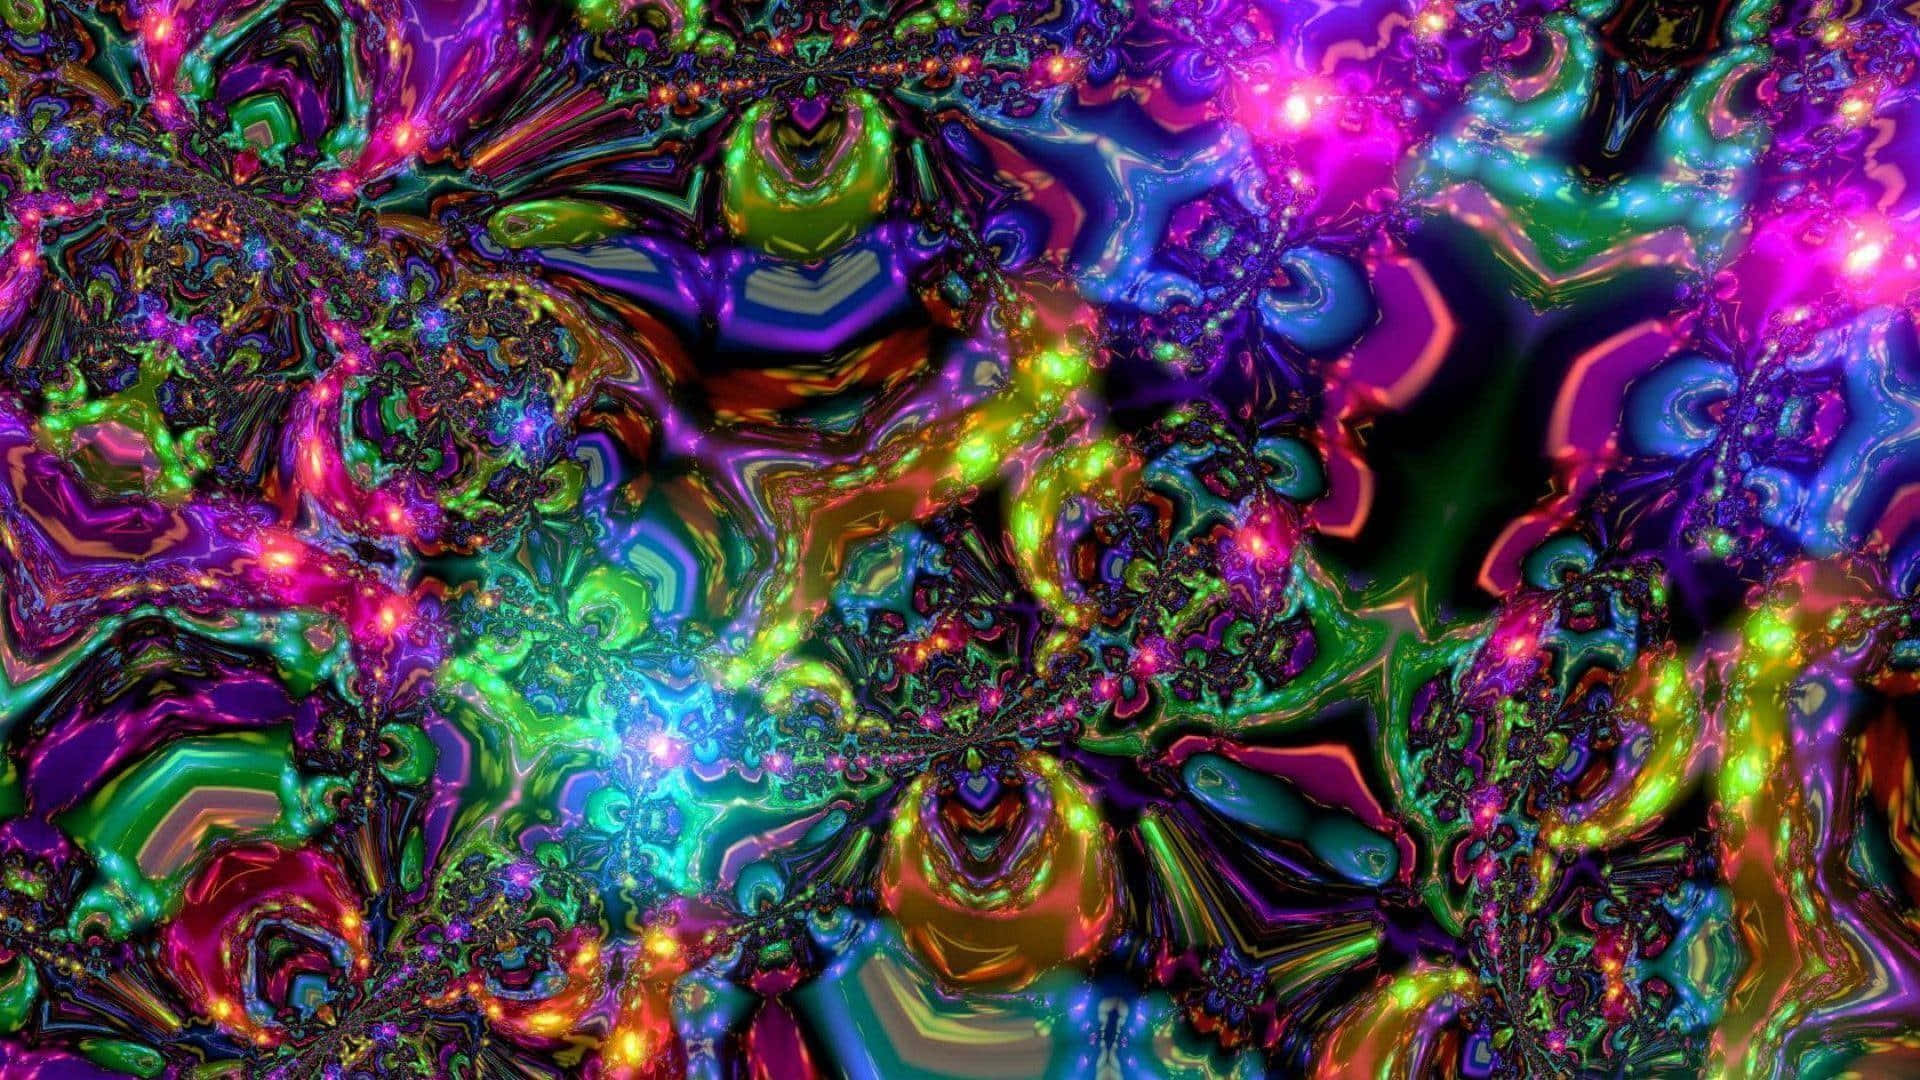 Journey into the Surreal Psychedelic World Wallpaper